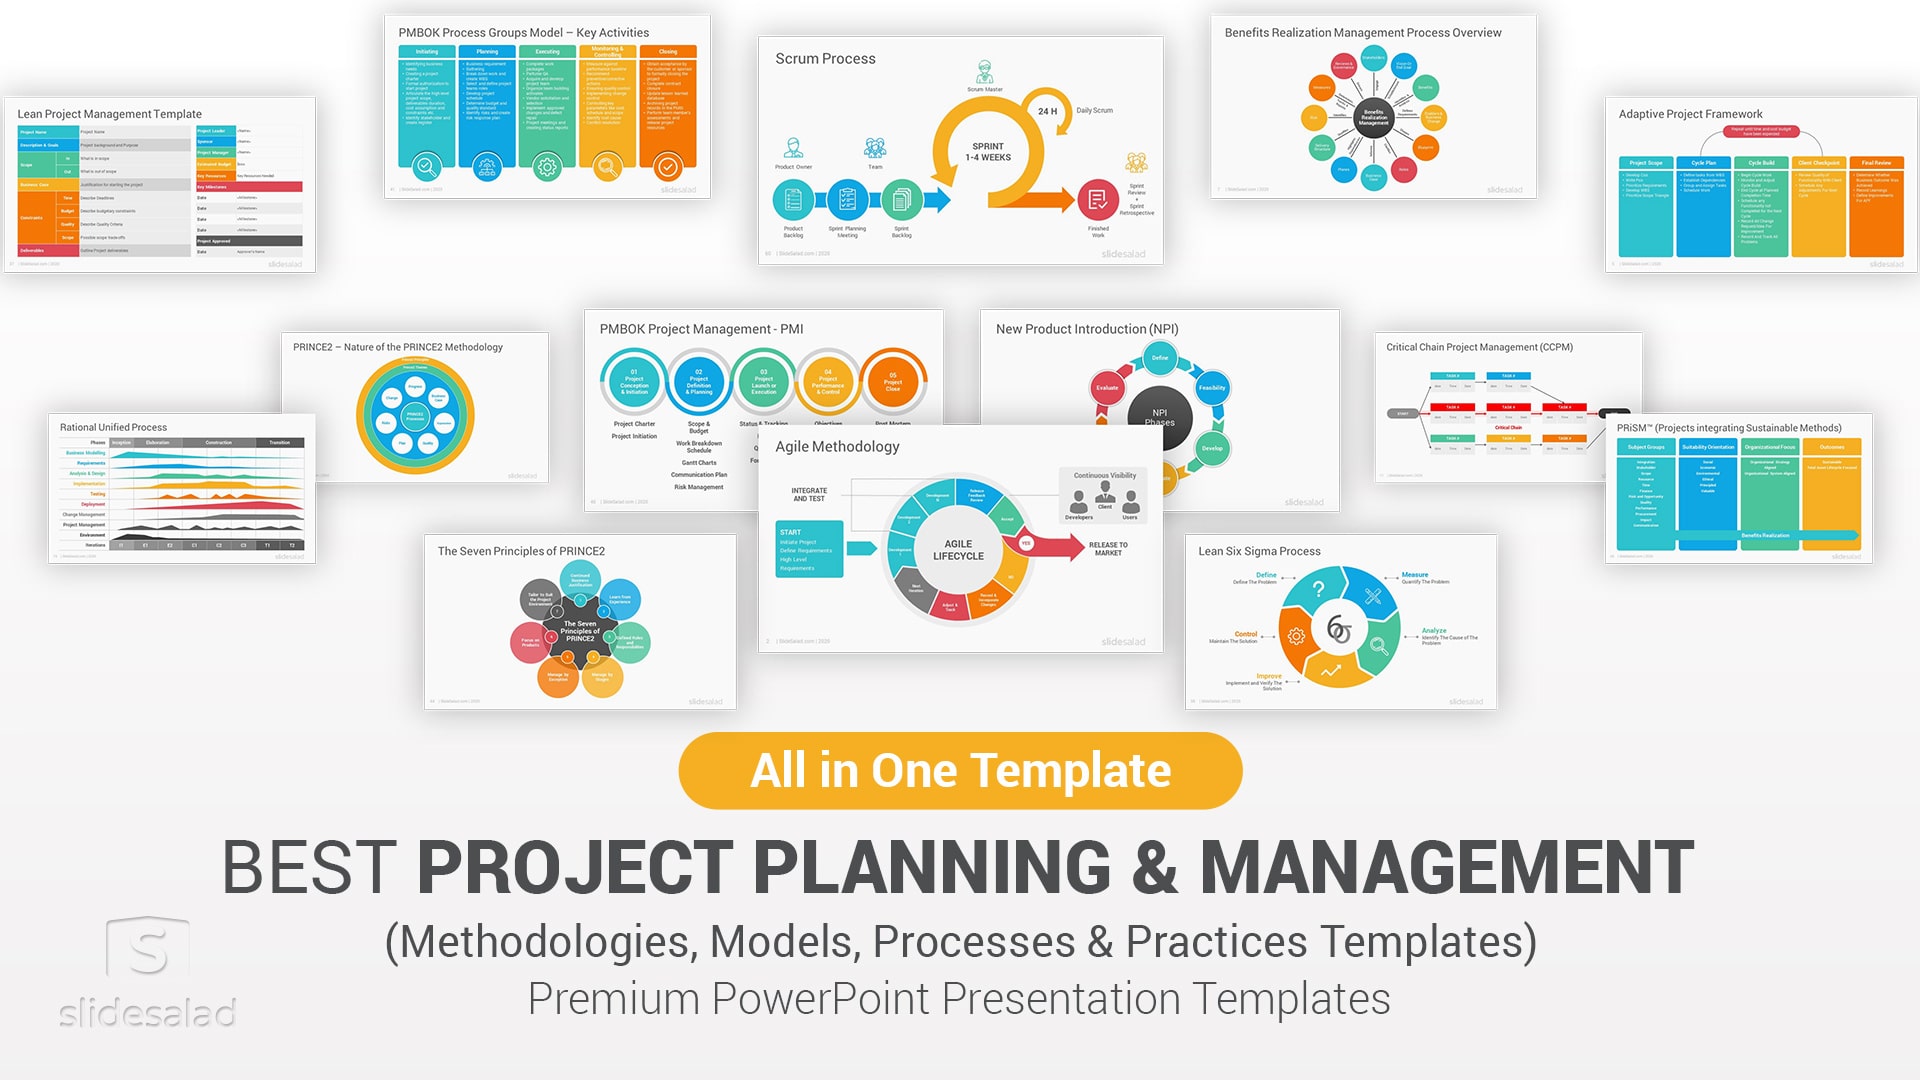 Project Planning And Management Models and Practices PowerPoint Templates - Awesome Project Planning Theme for PowerPoint Presentations